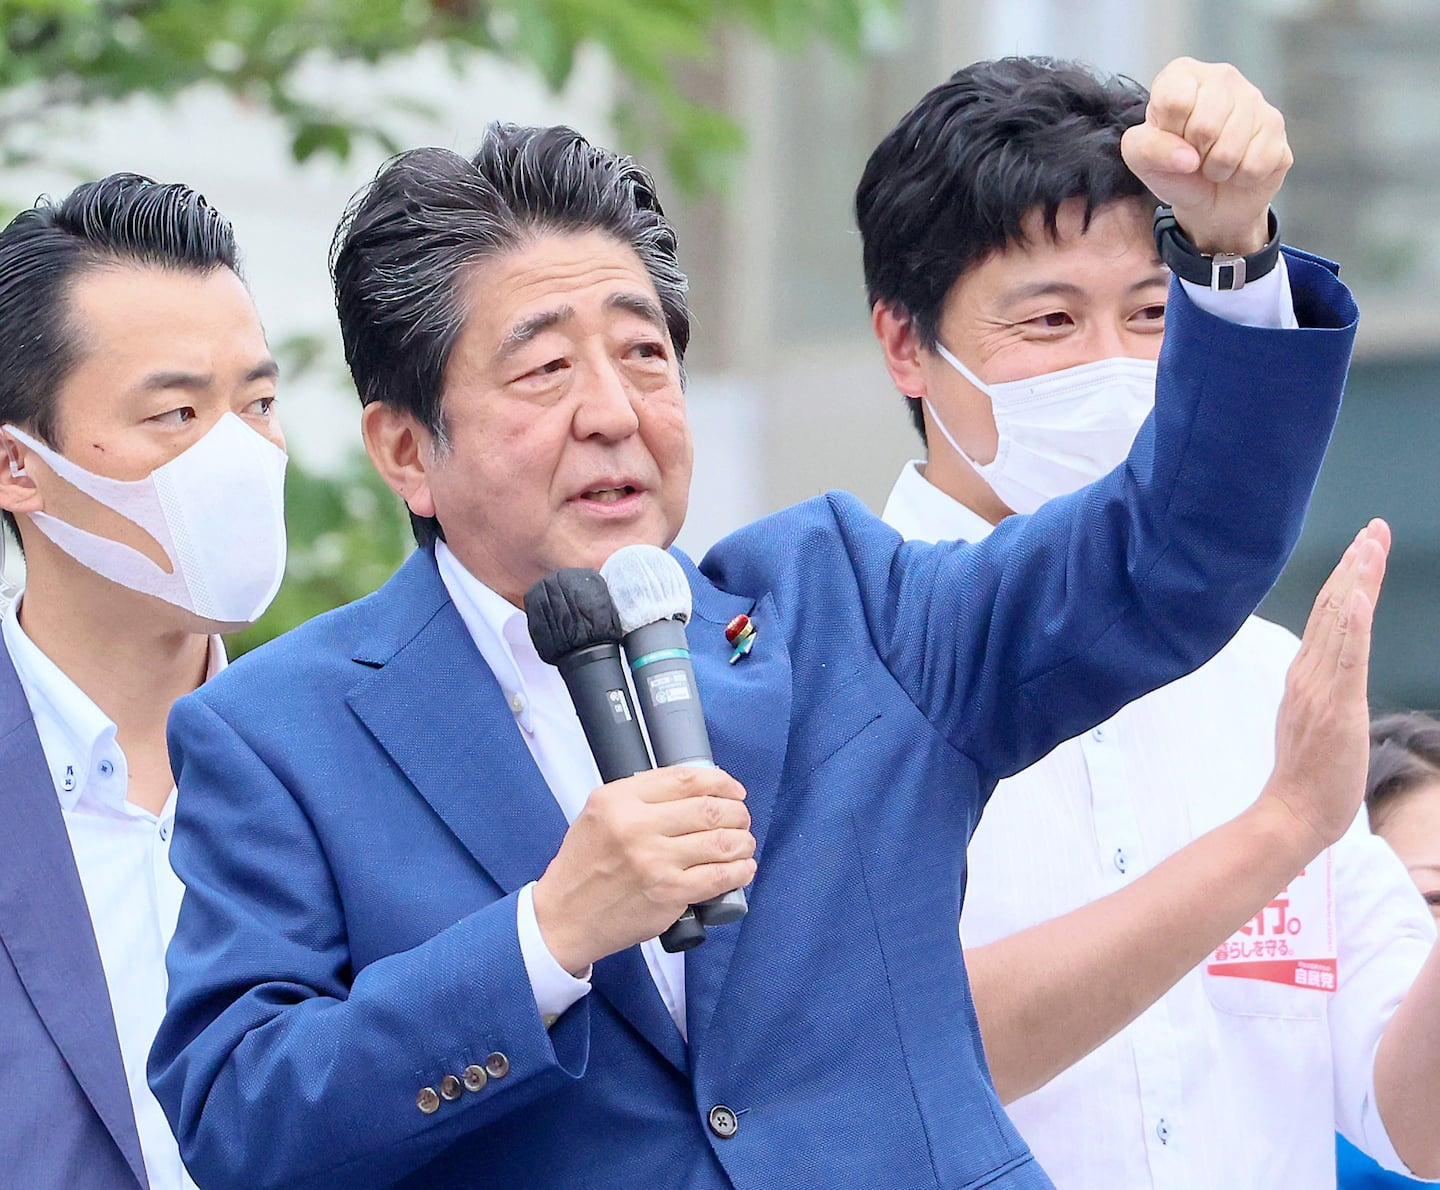 Shinzo Abe: Legacy, Controversies and Challenges